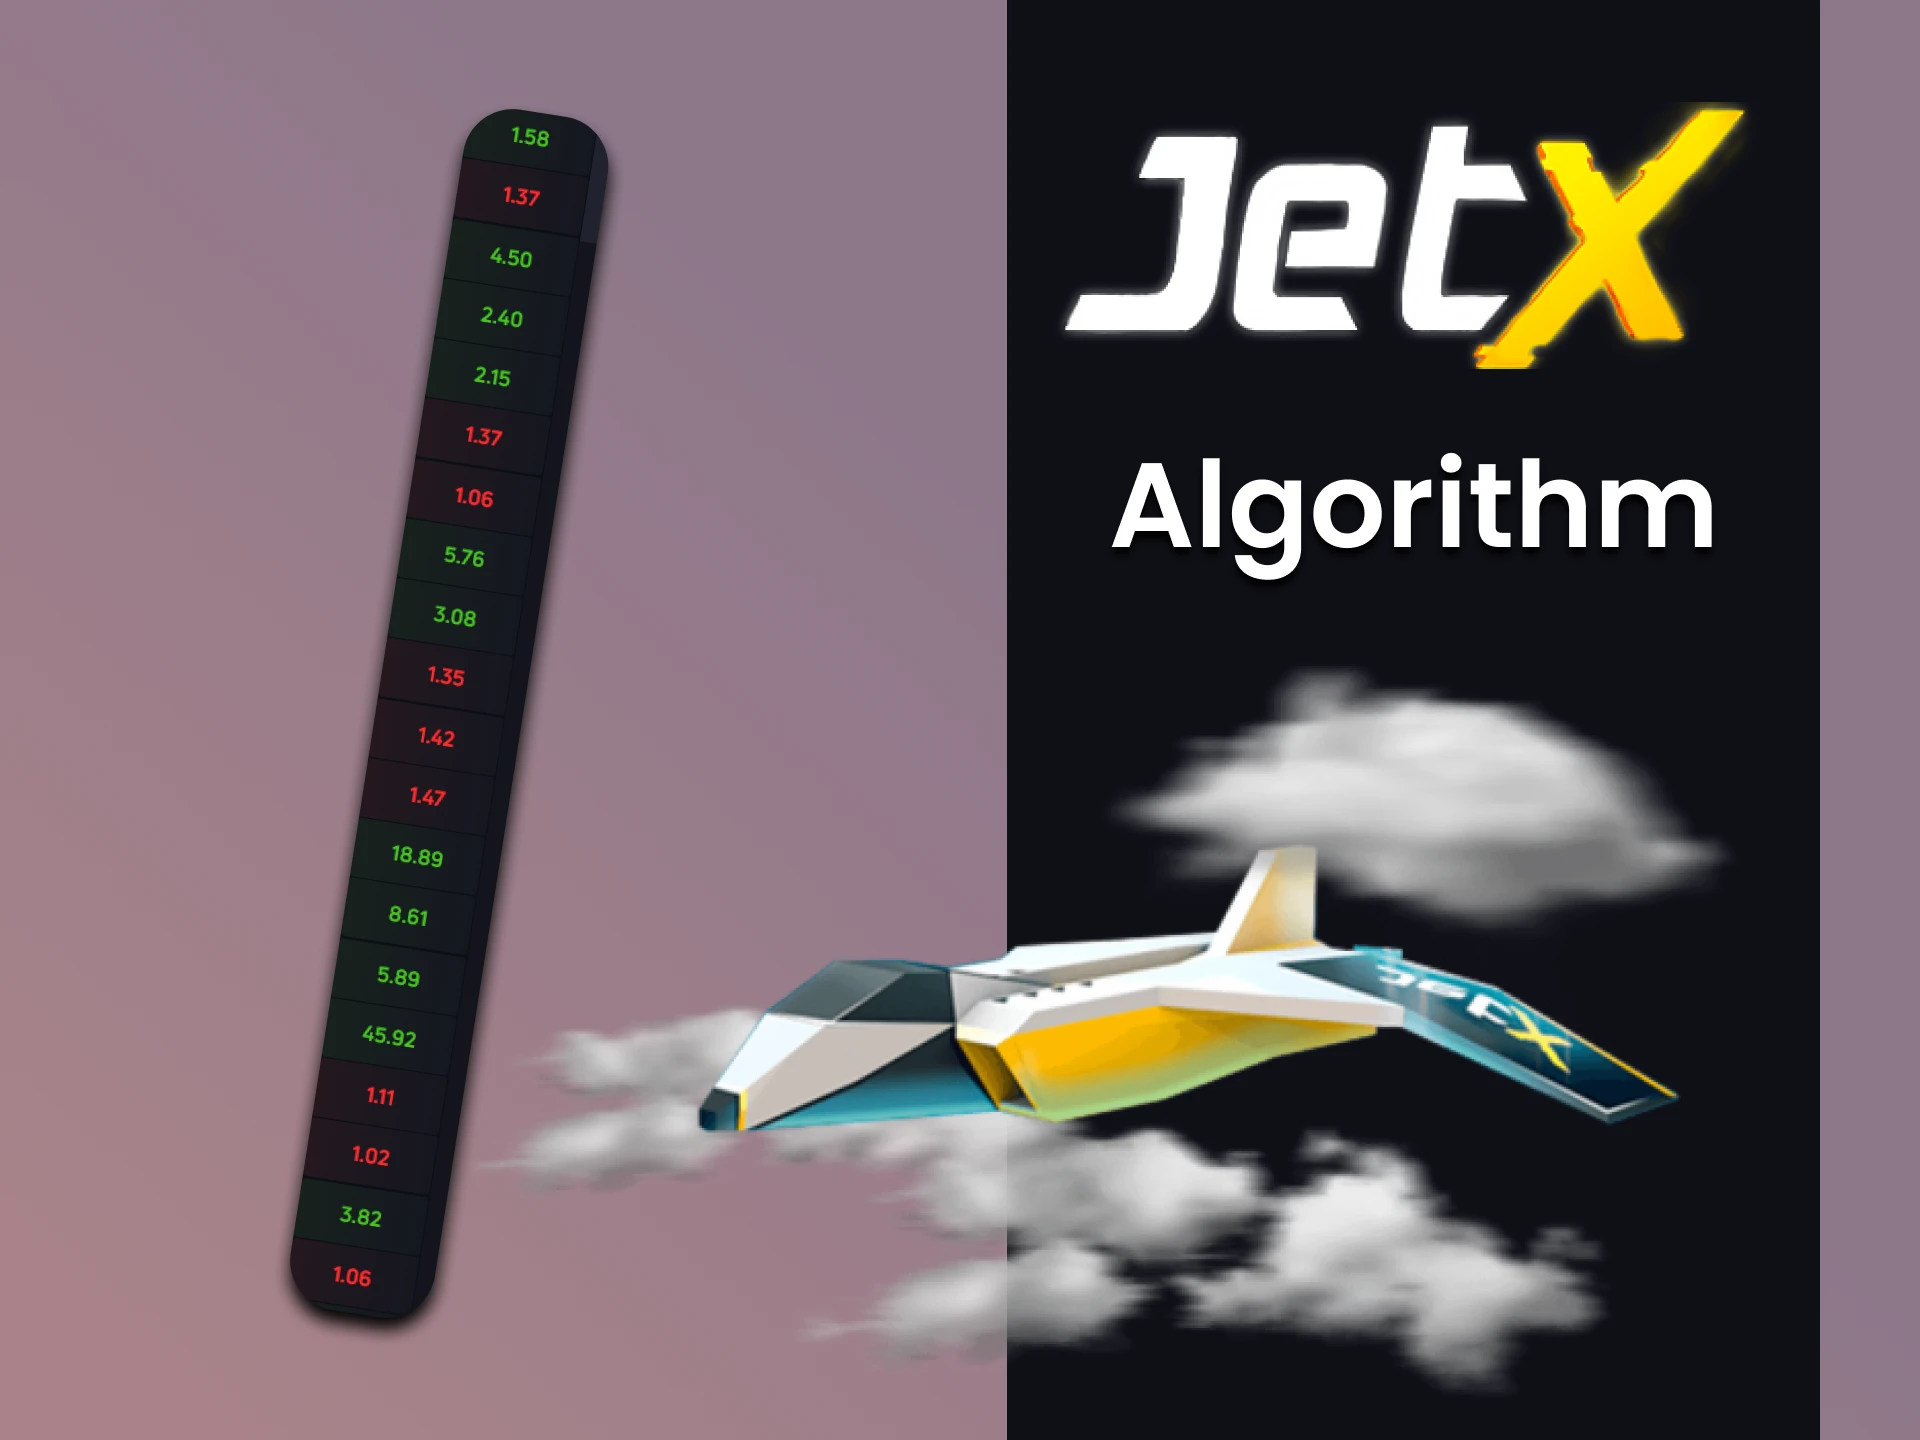 We will show how the JetX game algorithms work.